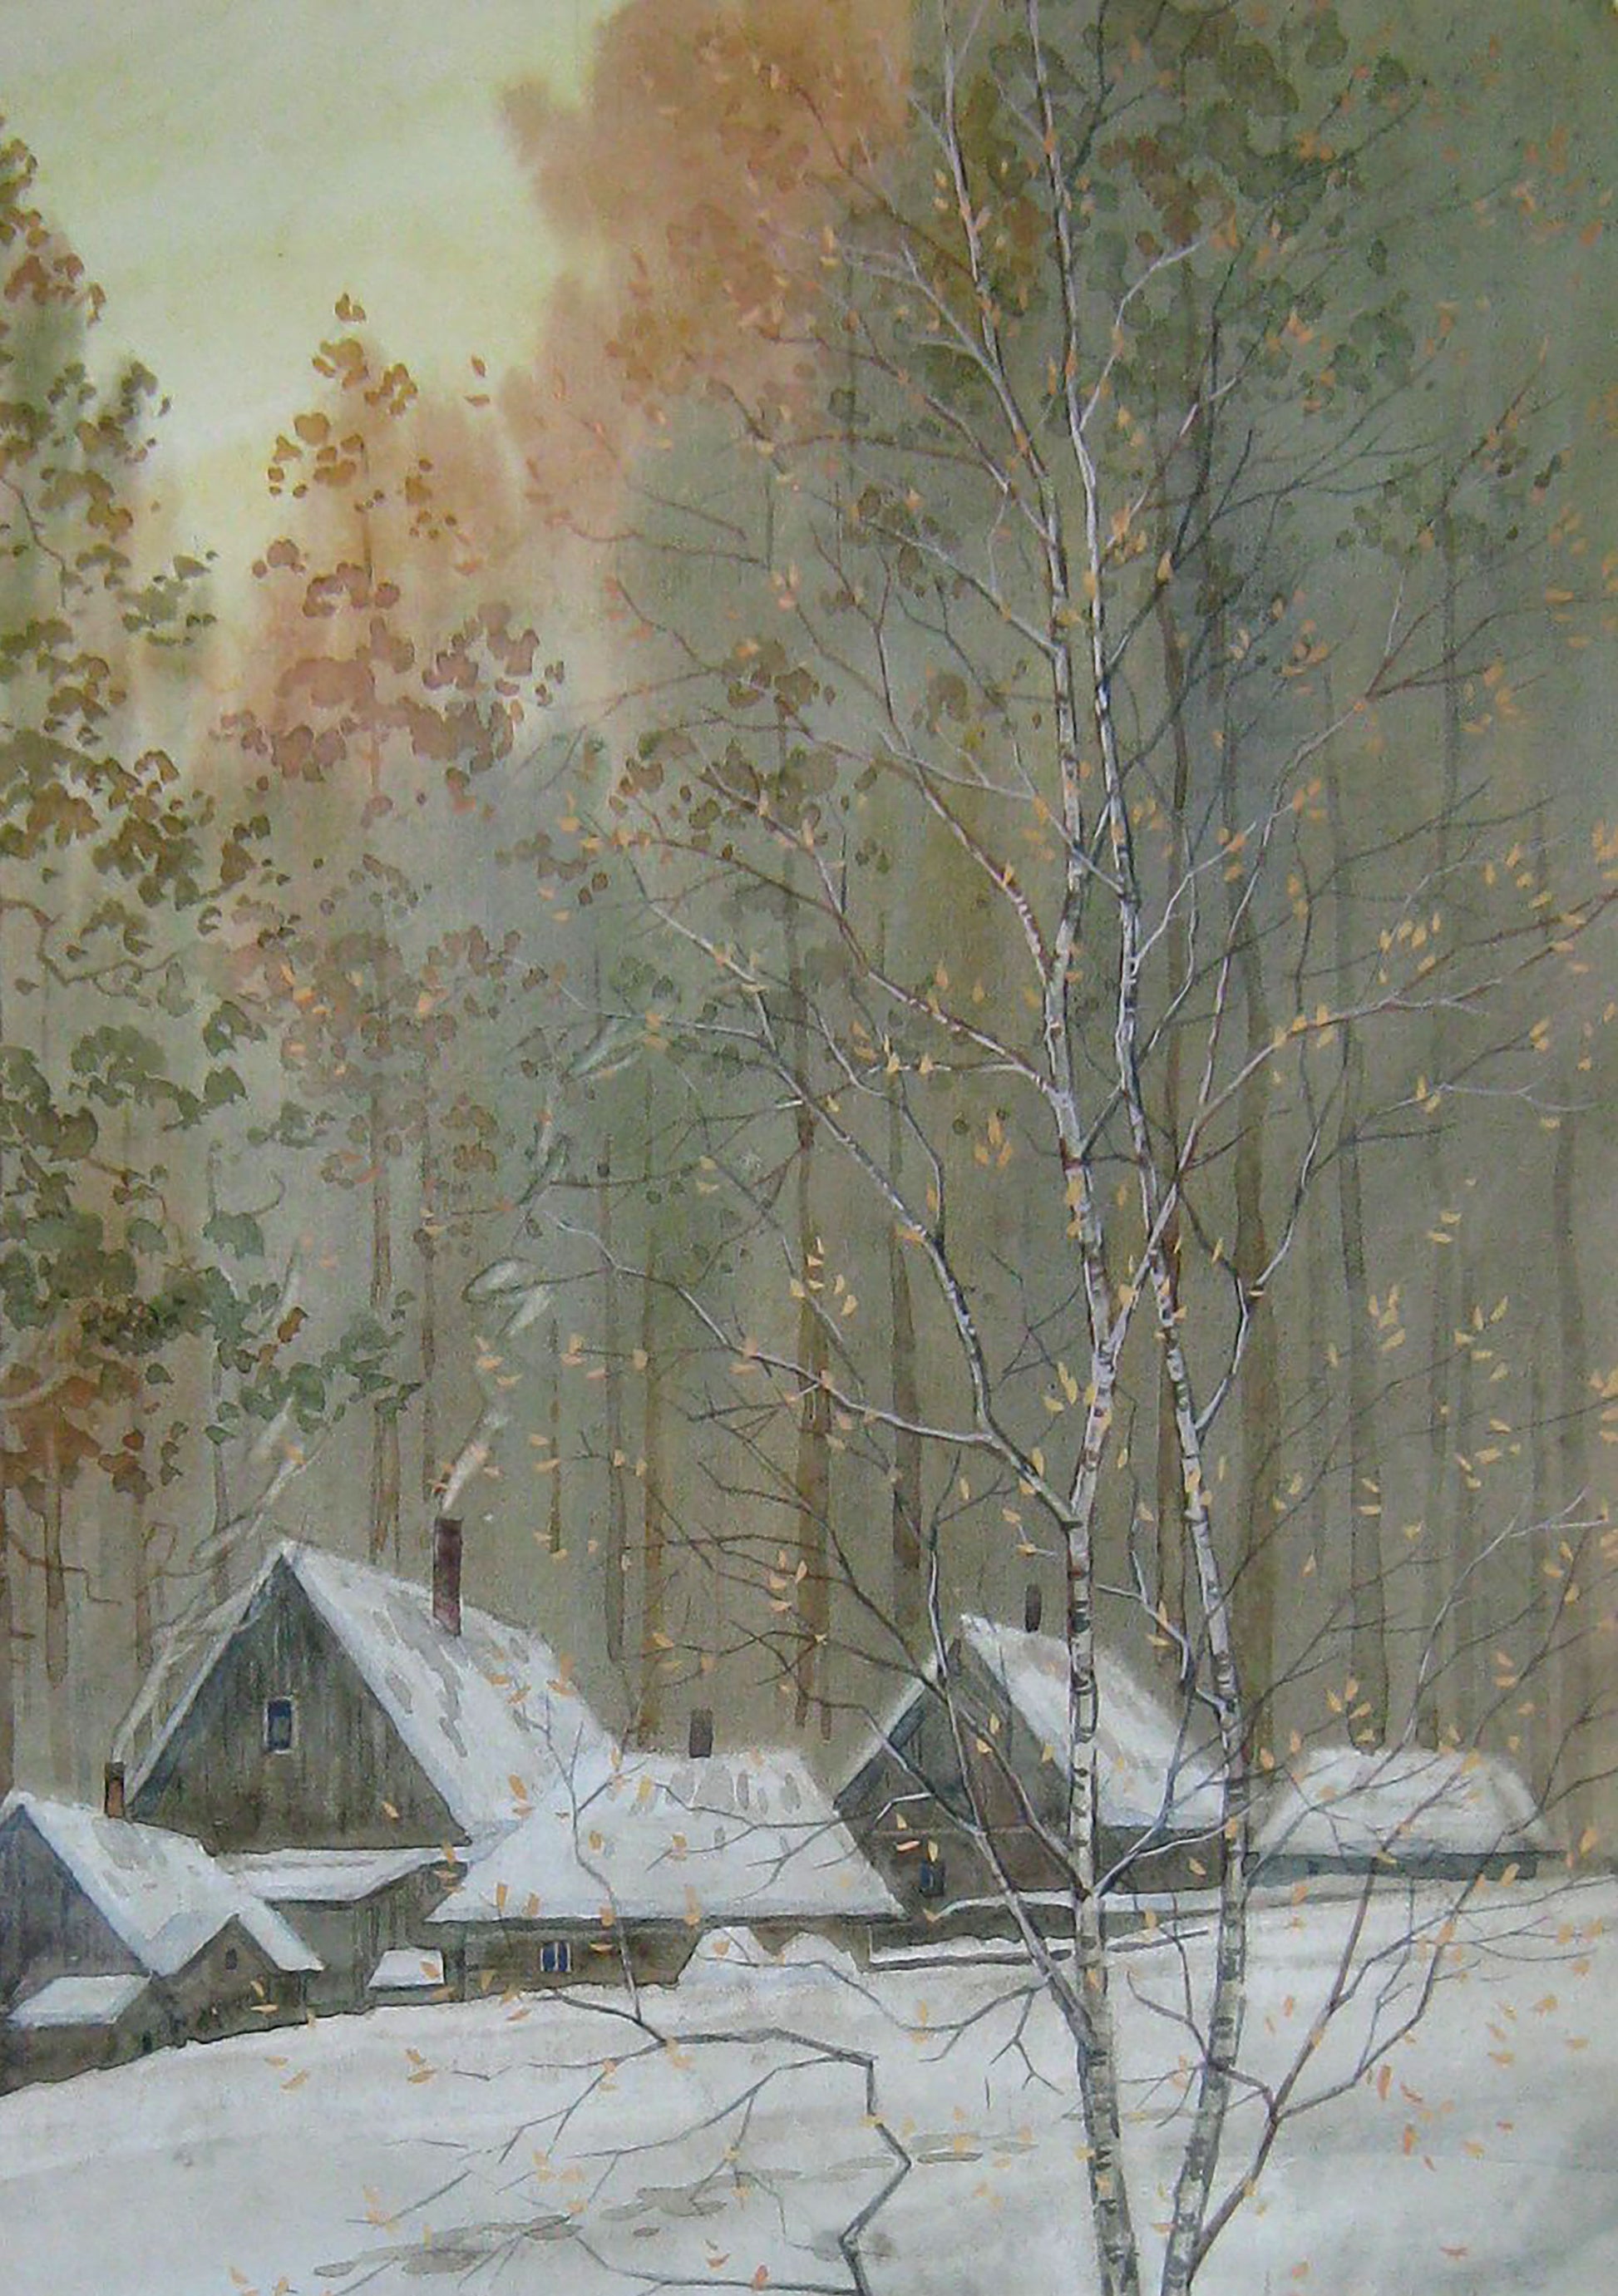 Cold February, a watercolor painting by Valery Savenets